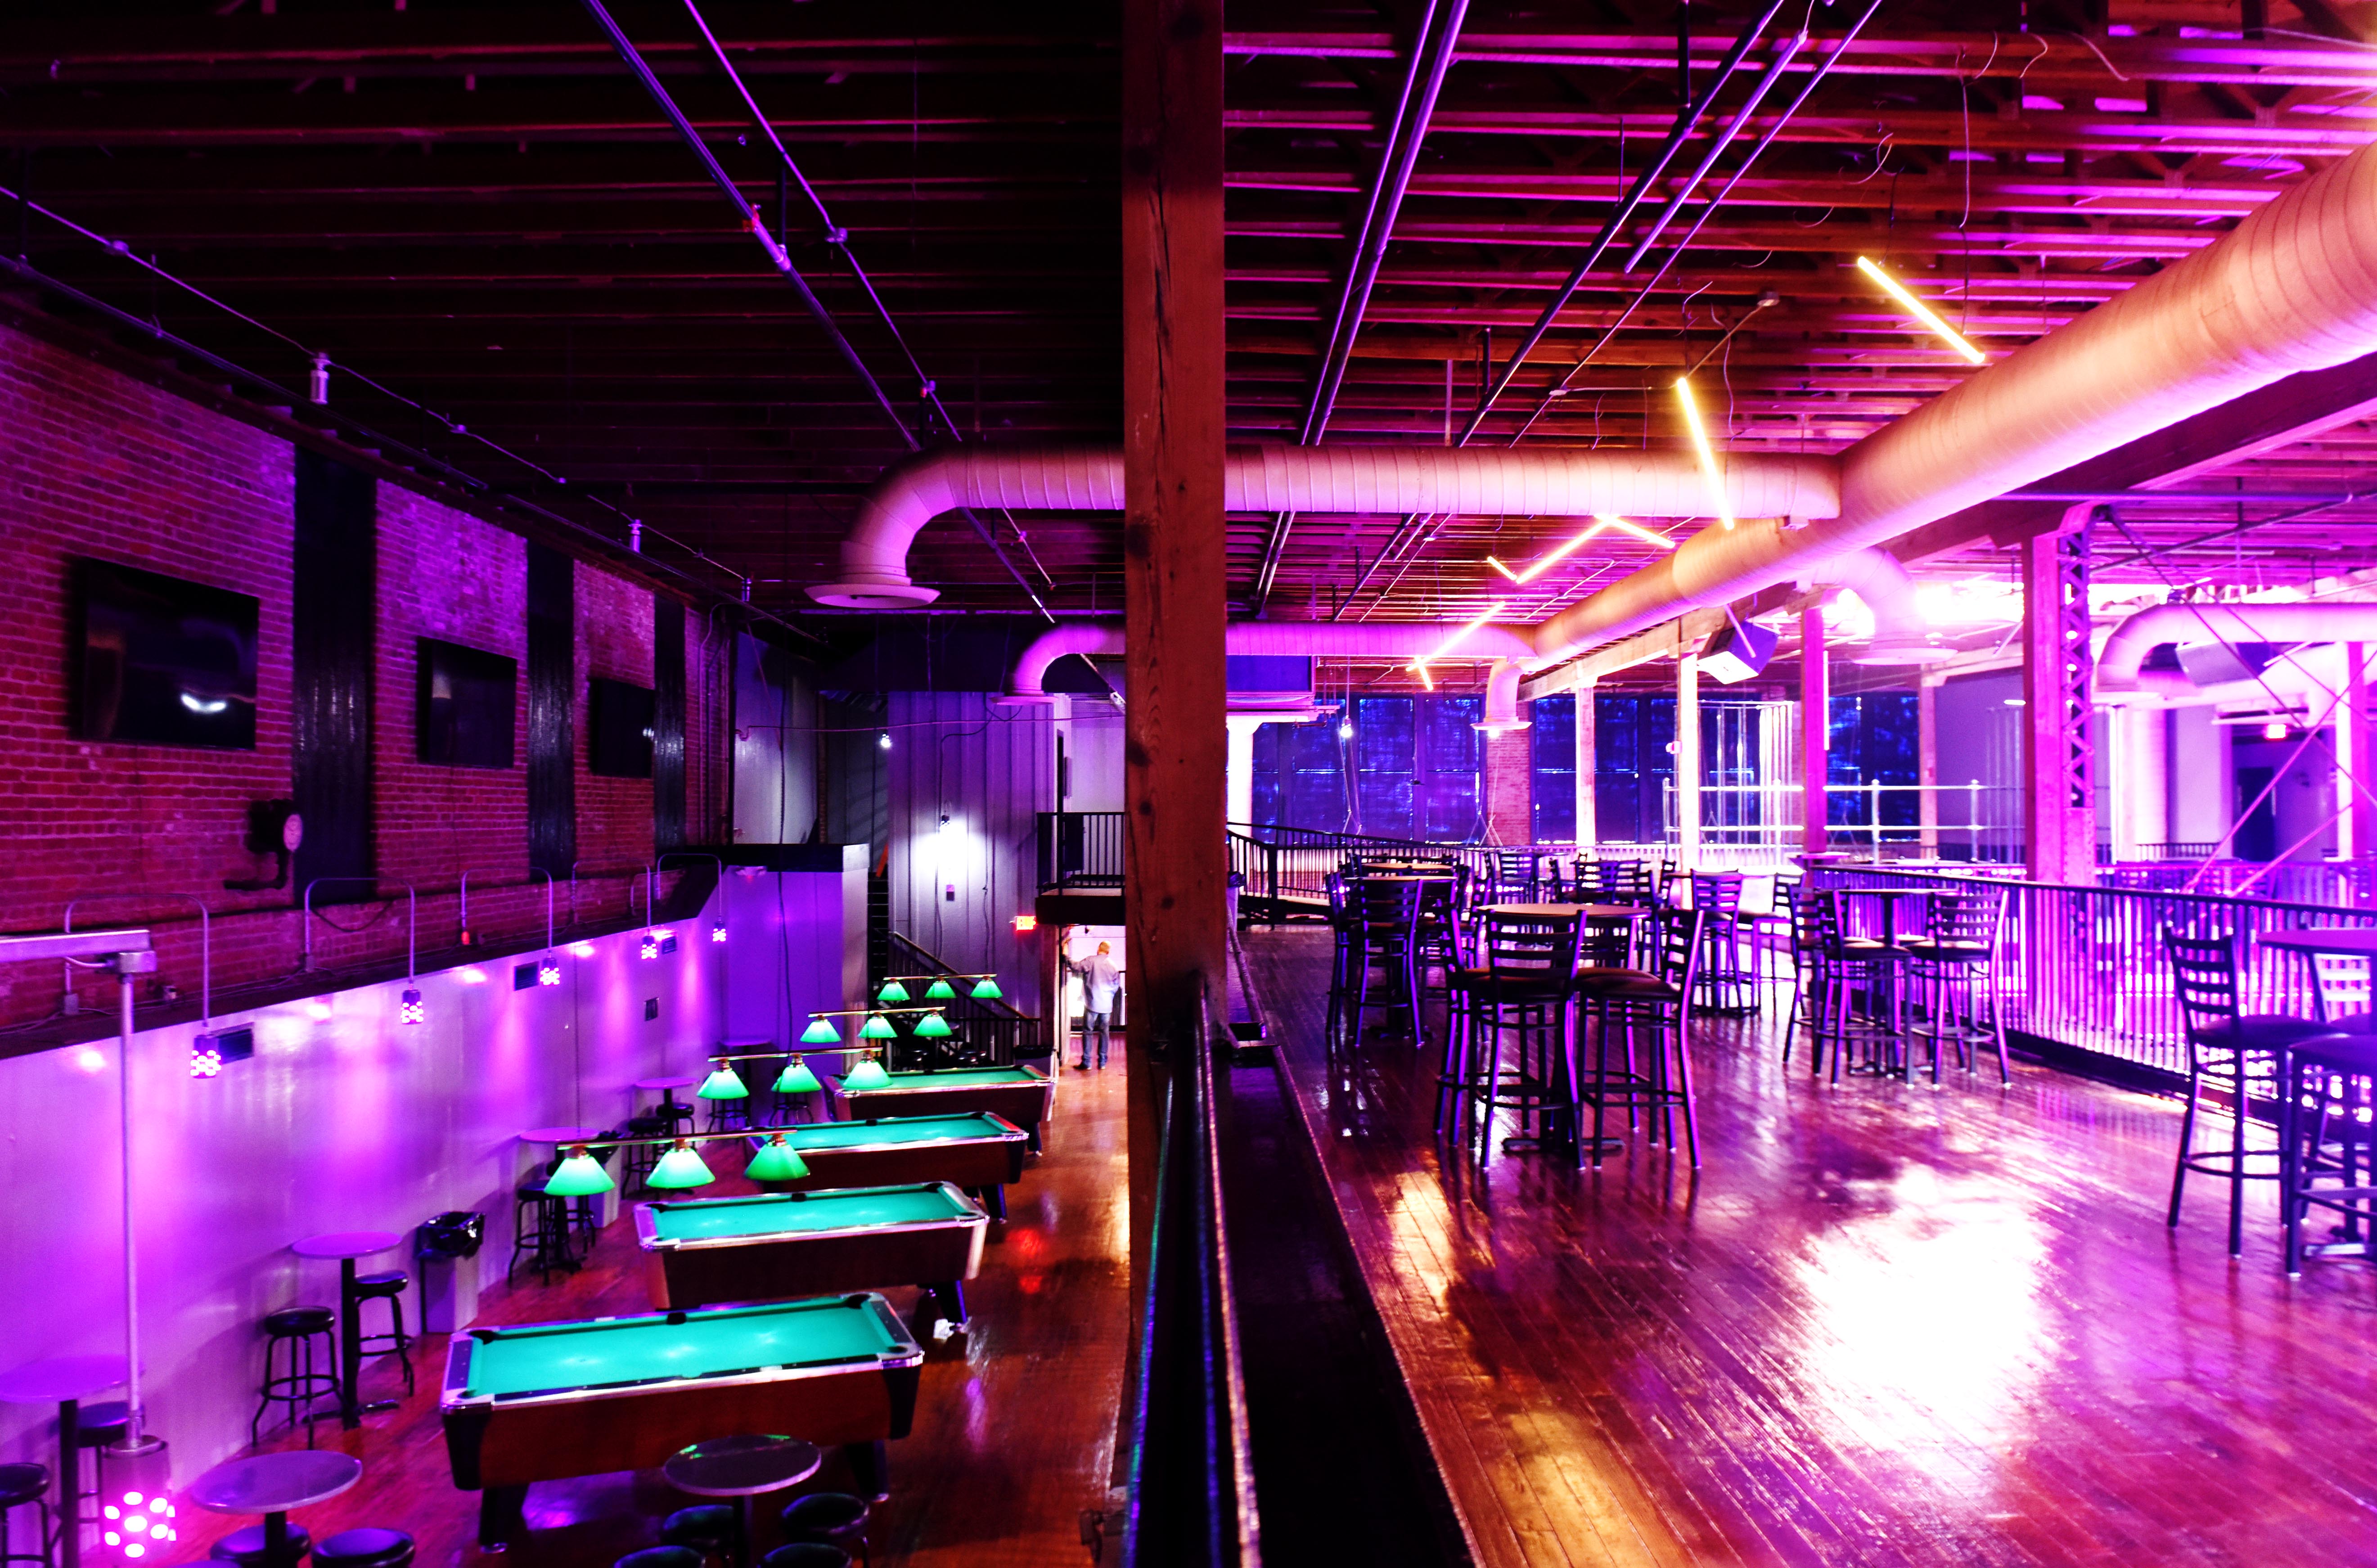 Popular nightclub The Phoenix gets a facelift in a new location